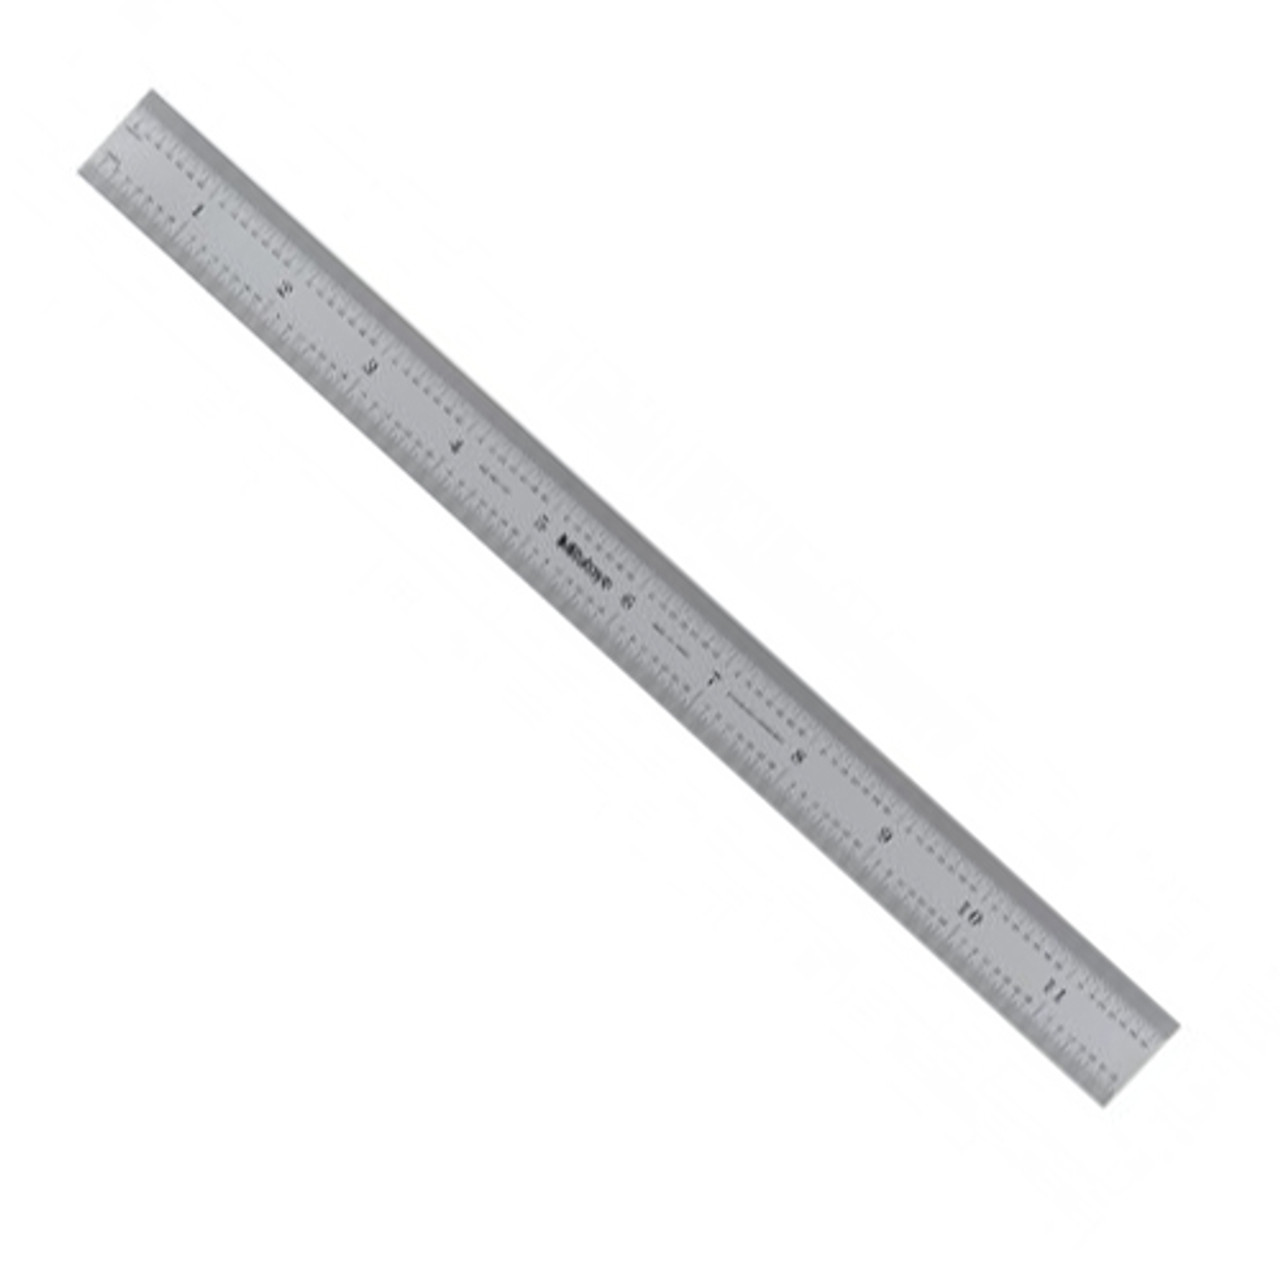 12-Inch Stainless Steel Precision Ruler with 1/8, 1/16, 1/32